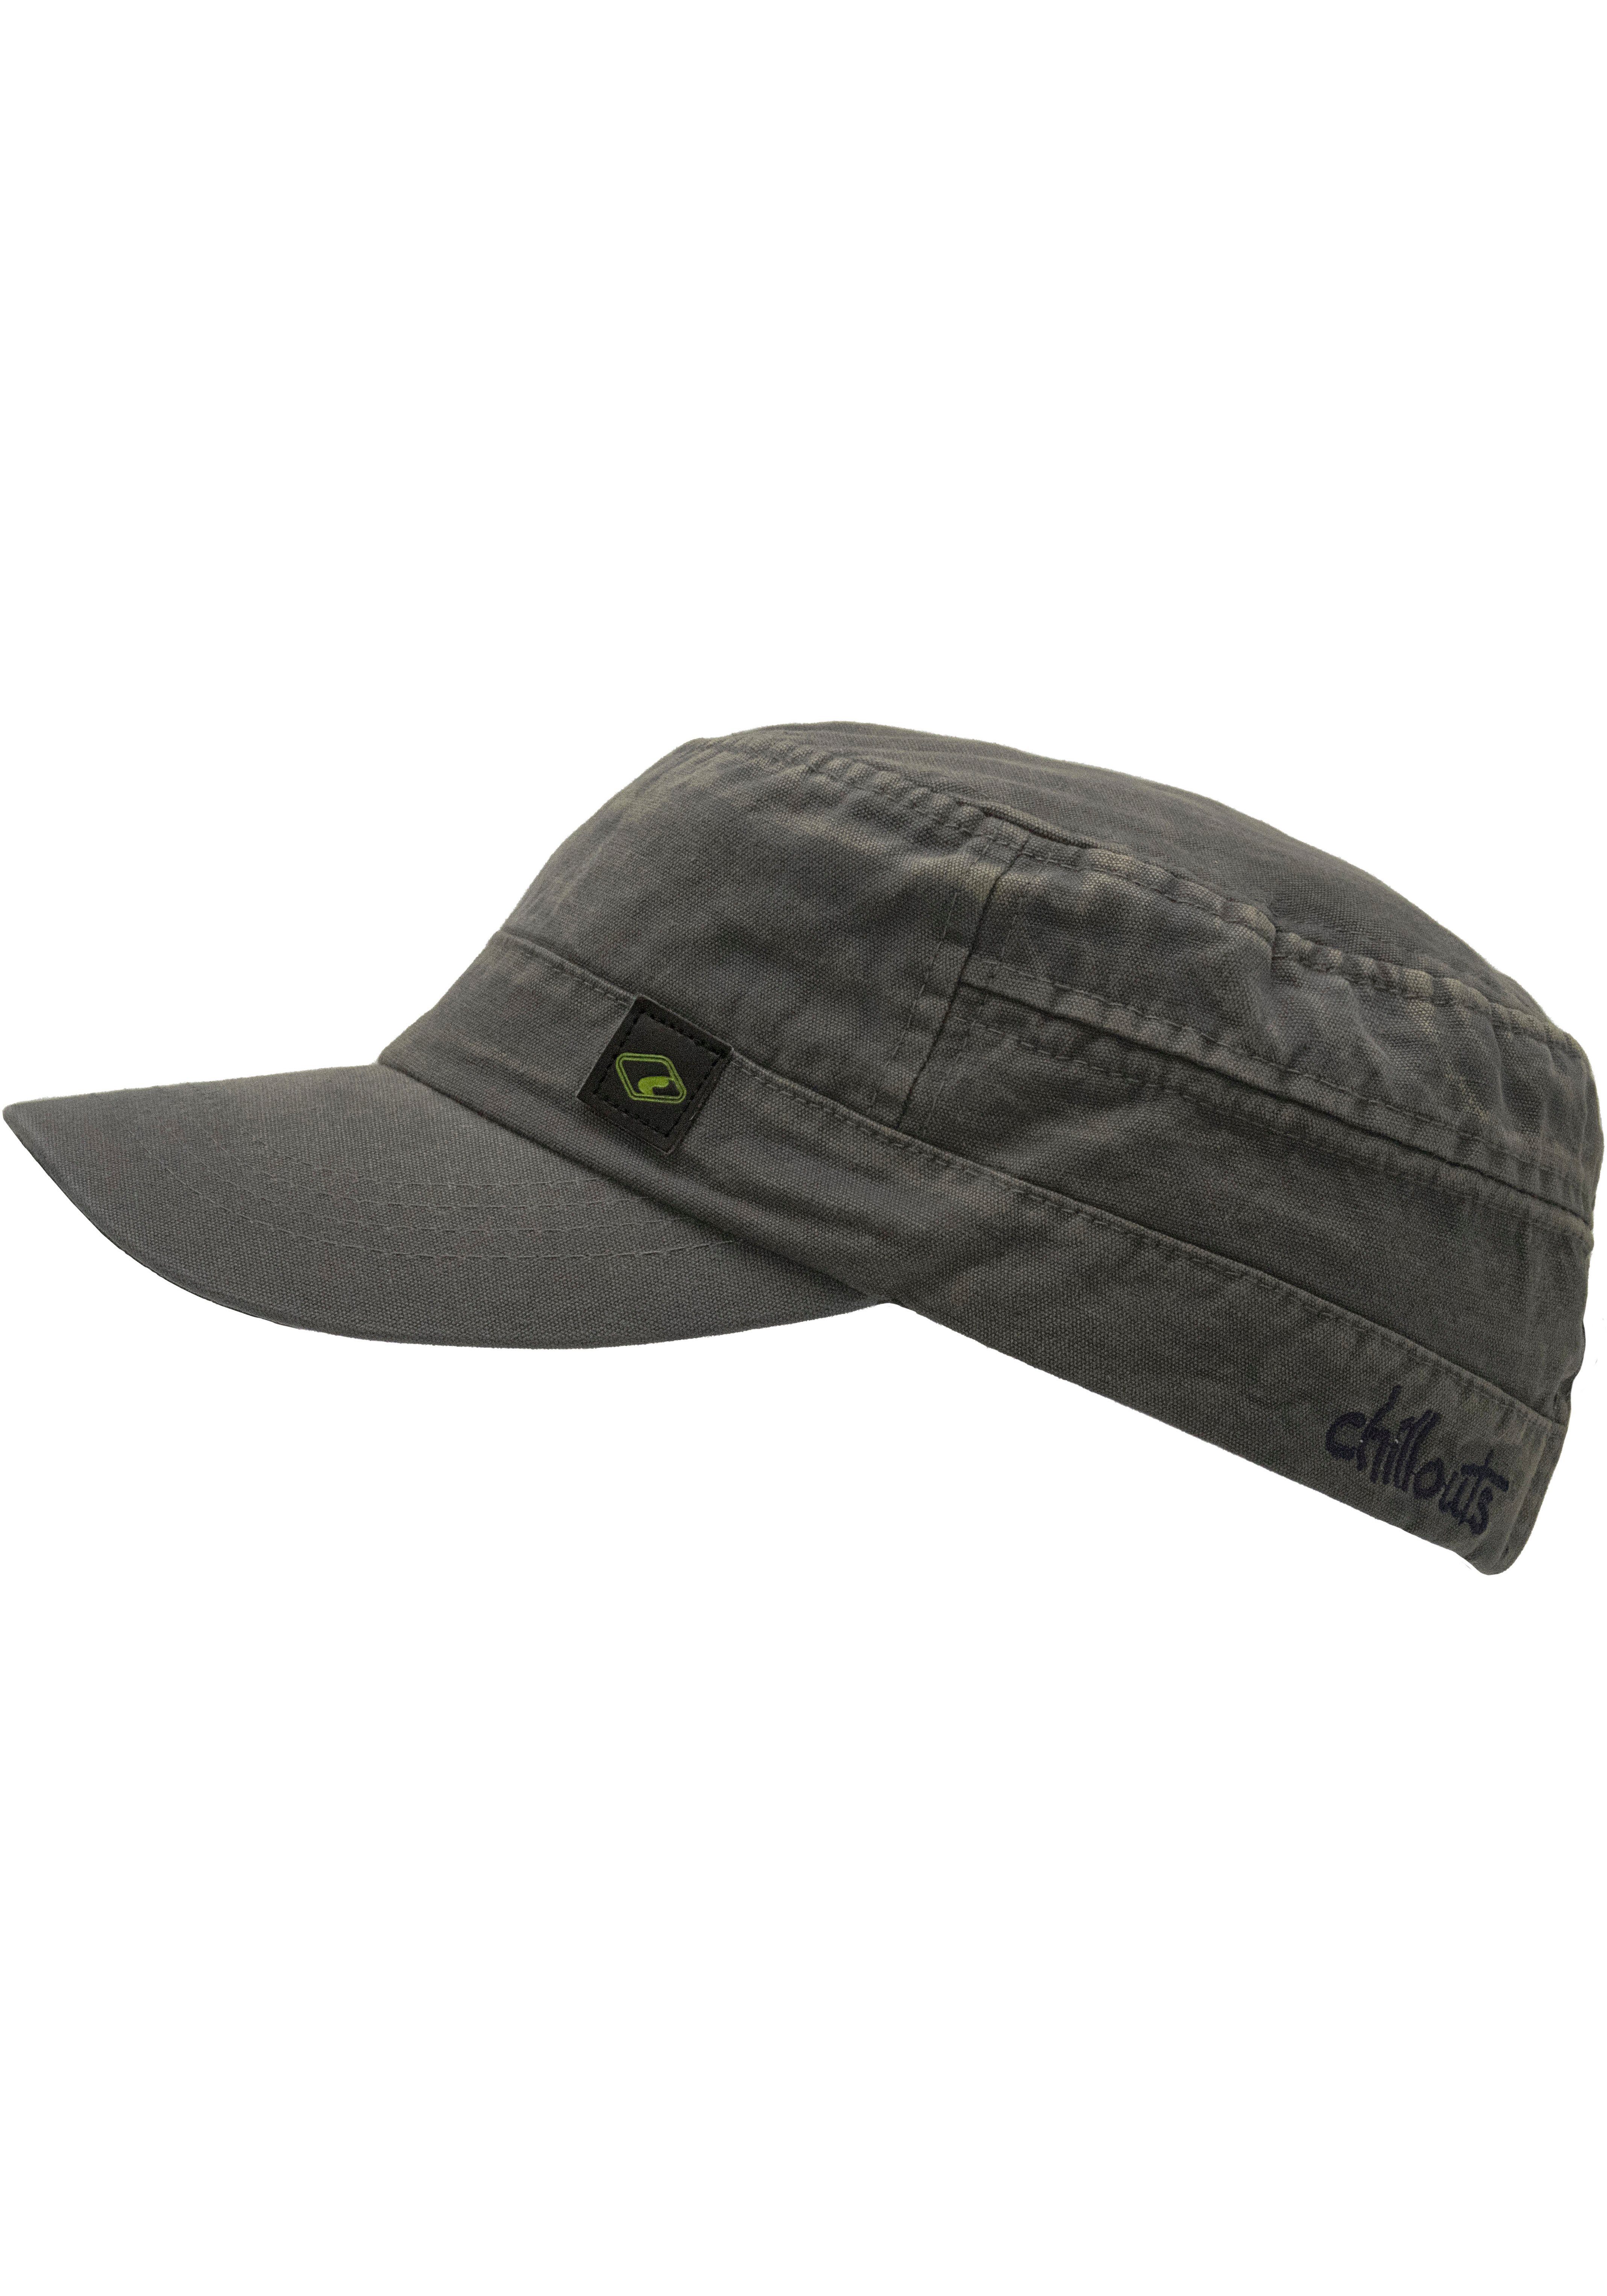 chillouts Army Cap El Paso washed Hat grey aus Size atmungsaktiv, reiner One Baumwolle